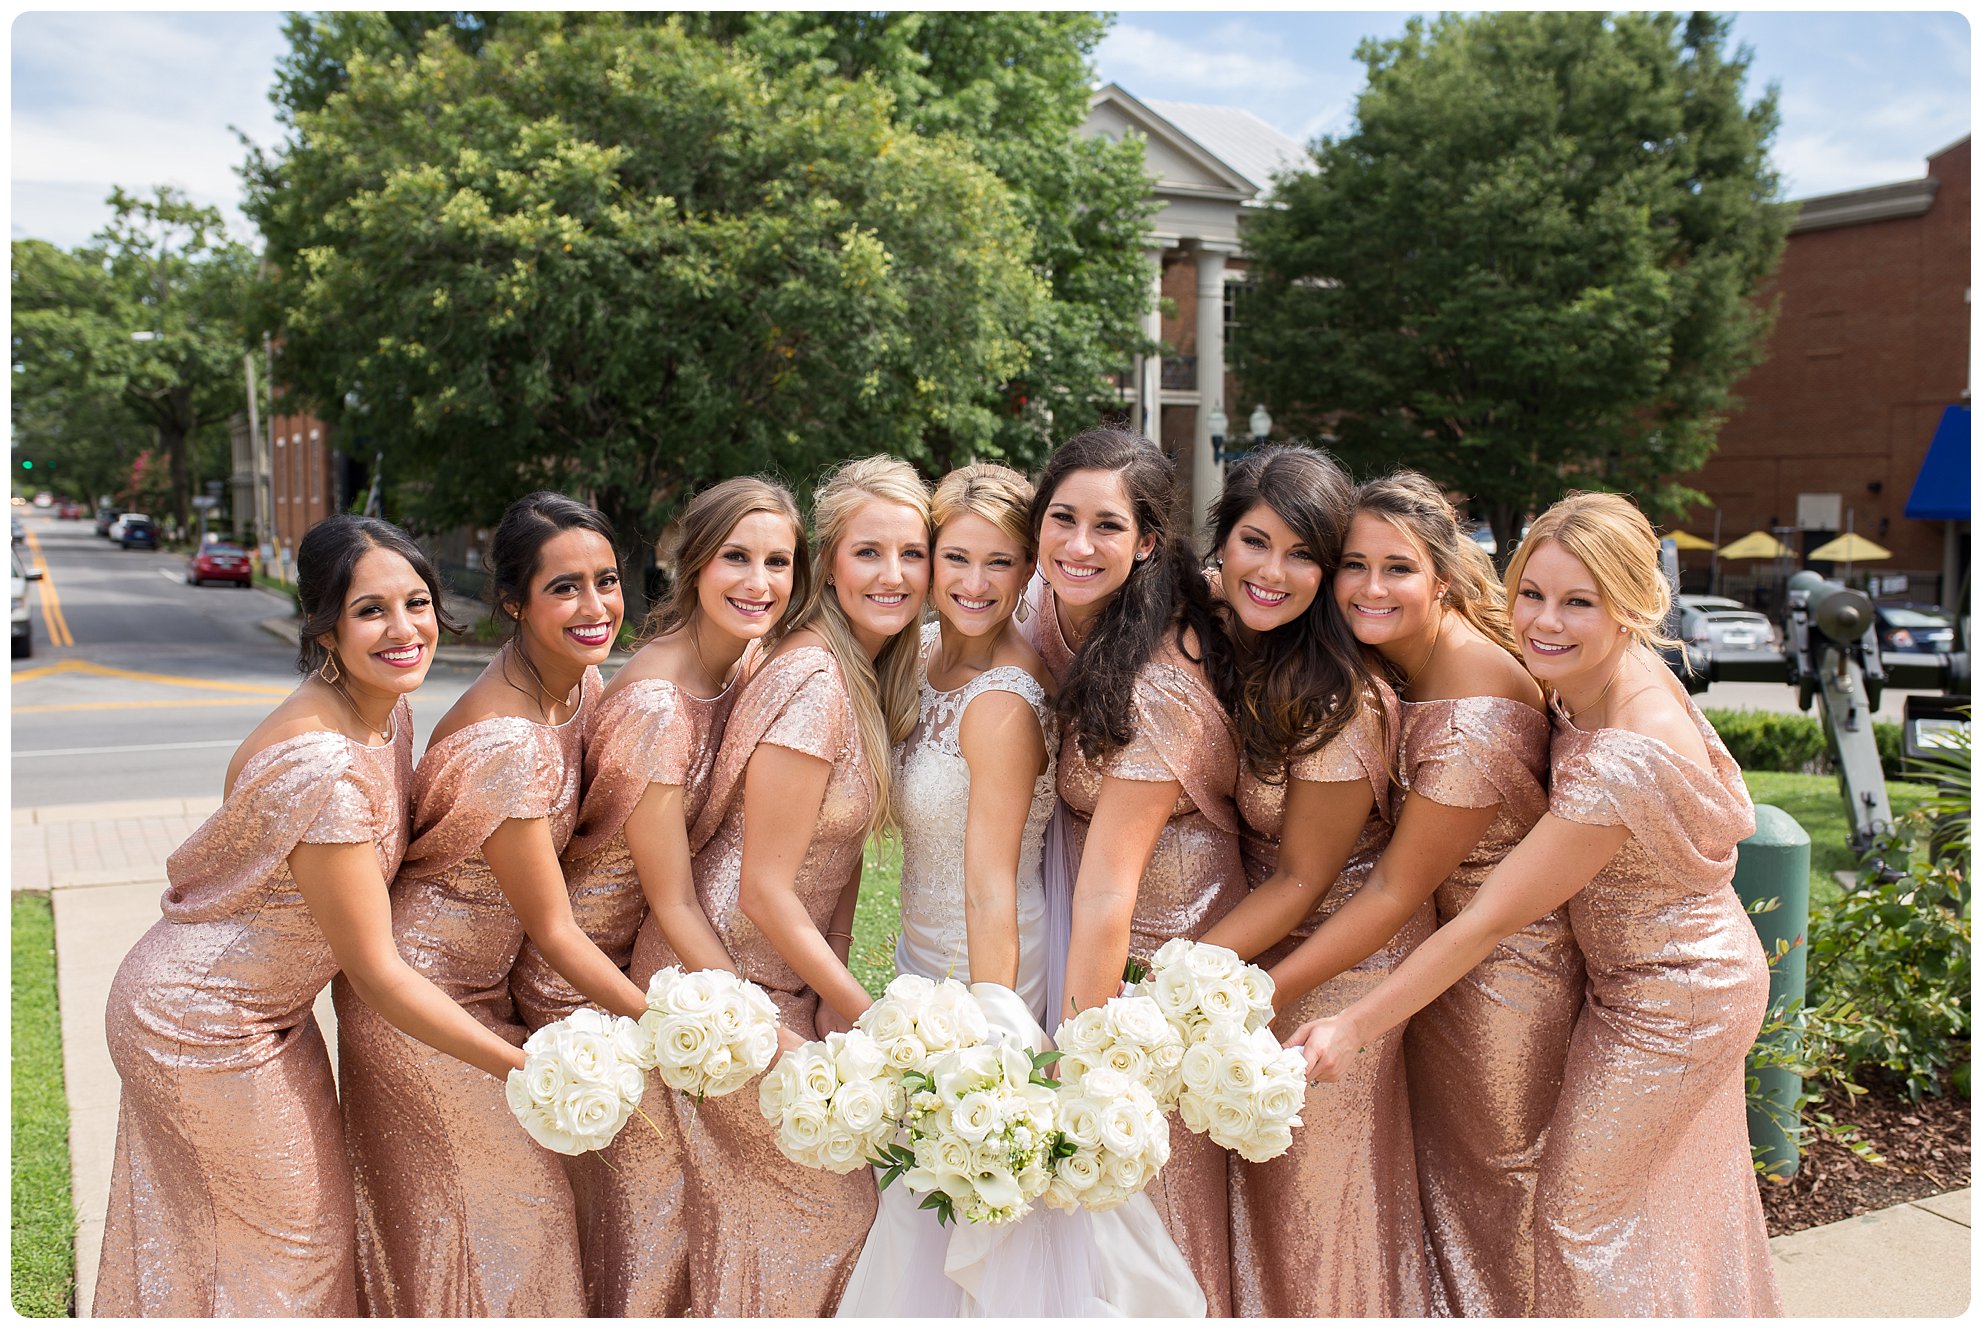 Wedding at the McConnell House in Franklin, TN, Melanie Grady Photography, sequin bridesmaid dresses, champagne wedding, nashville wedding, southern wedding, southern bride, Franklin Tennessee Wedding at the McConnell House, Nashville Wedding Photographer, the best nashville wedding photographer, rose gold wedding